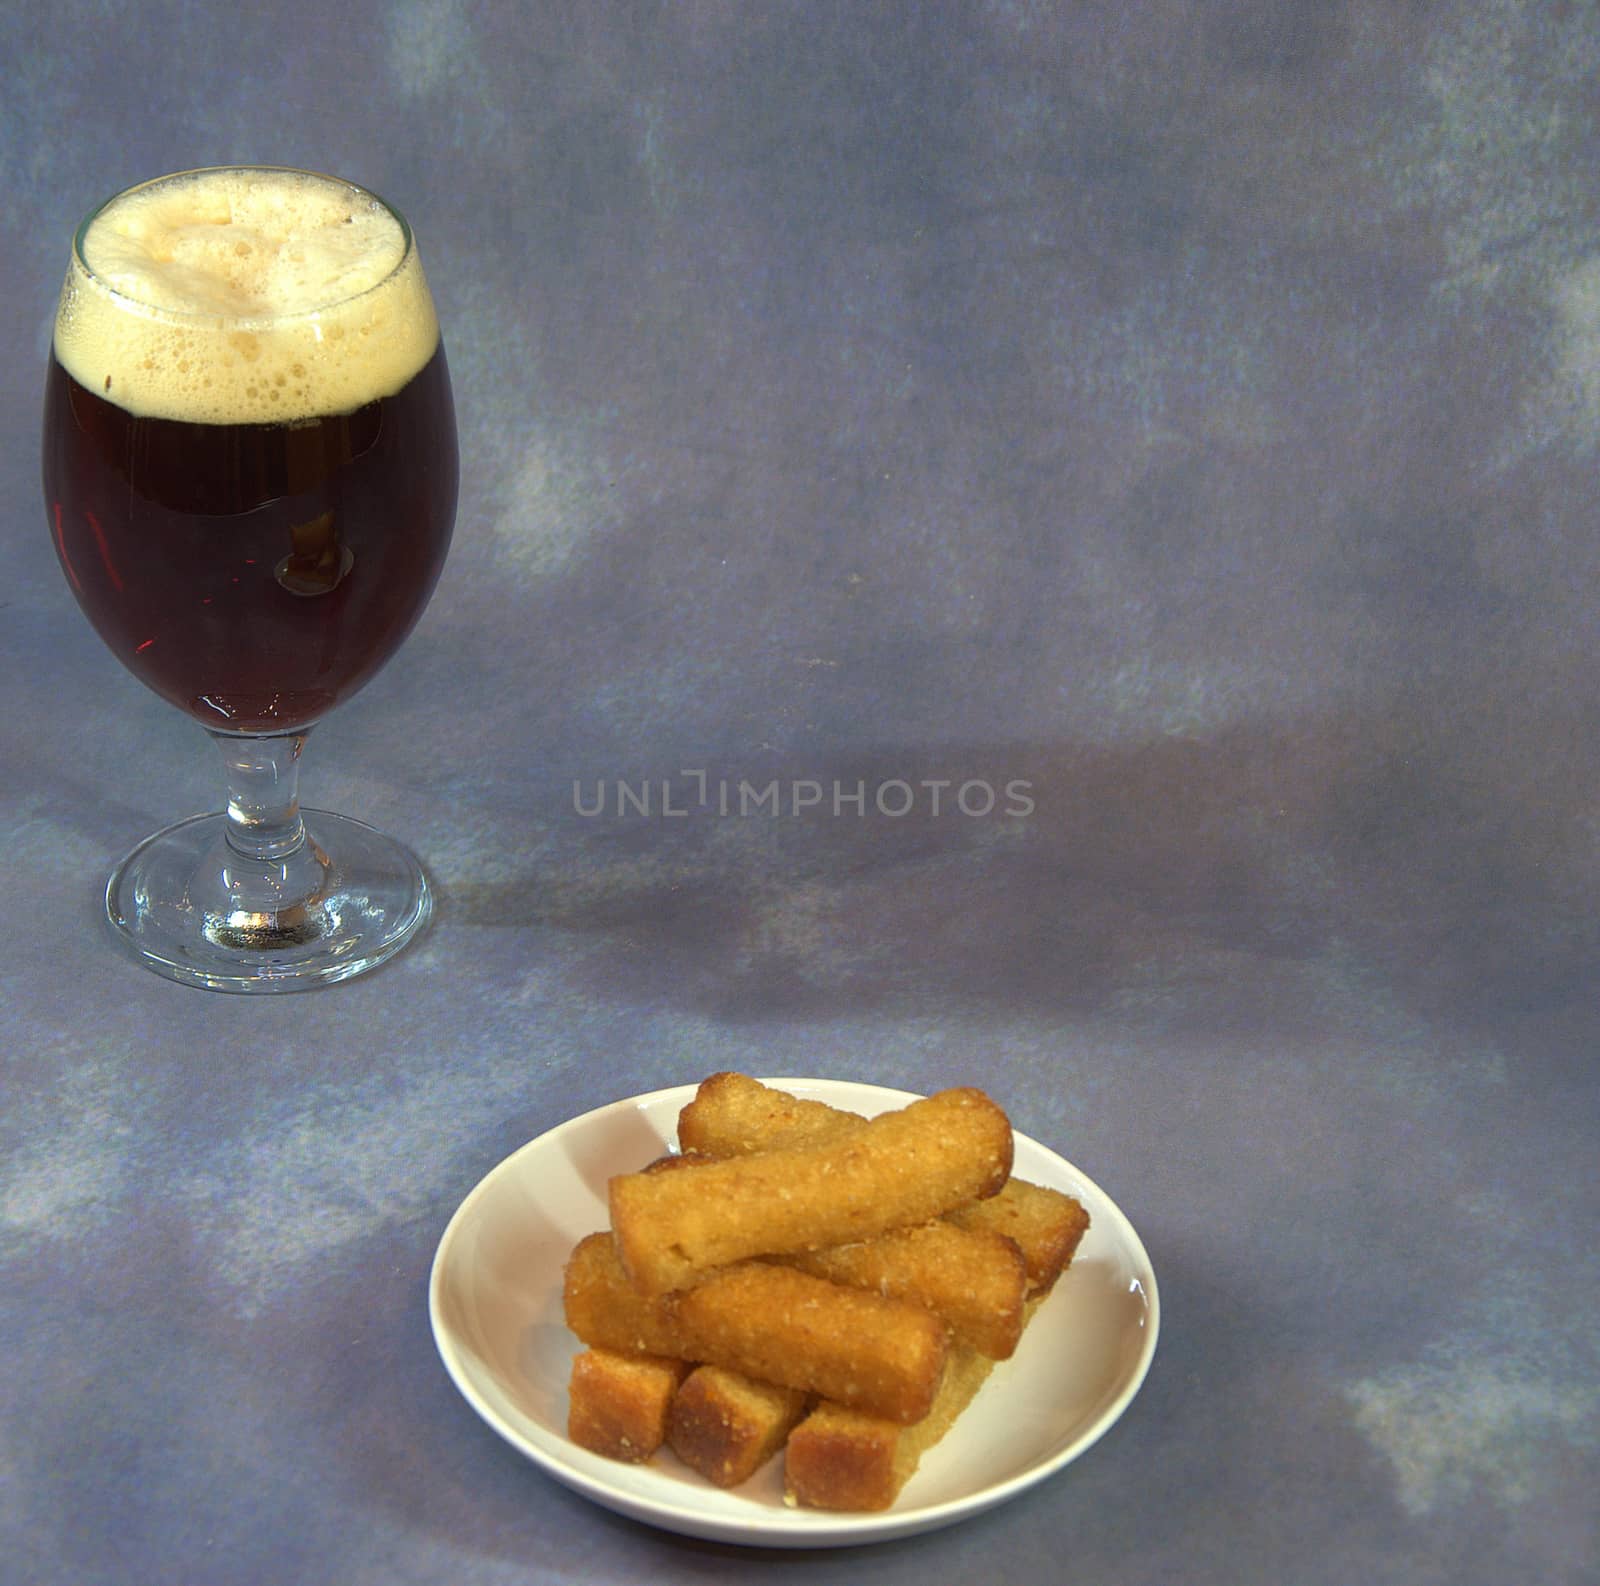 A full glass of dark beer with foam and a plate with wheat croutons on a gray background. Close-up.